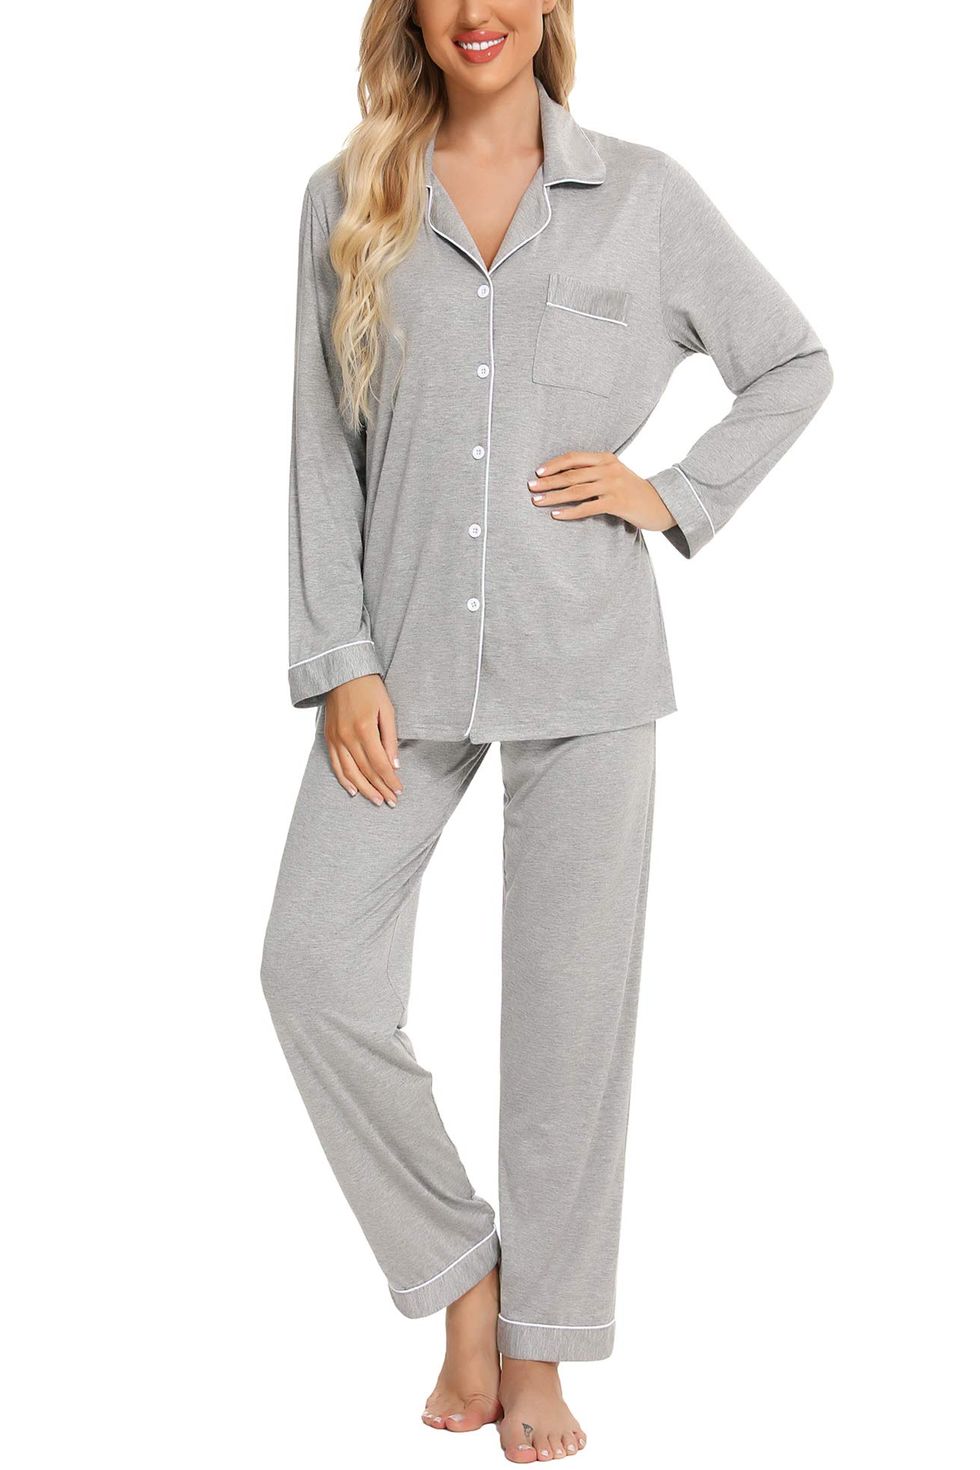 Alexander Del Rossa Women's Pajamas Lounge Set, Long Sleeve Top and Pants  with Pockets, Viscose Pjs Floral Flowers